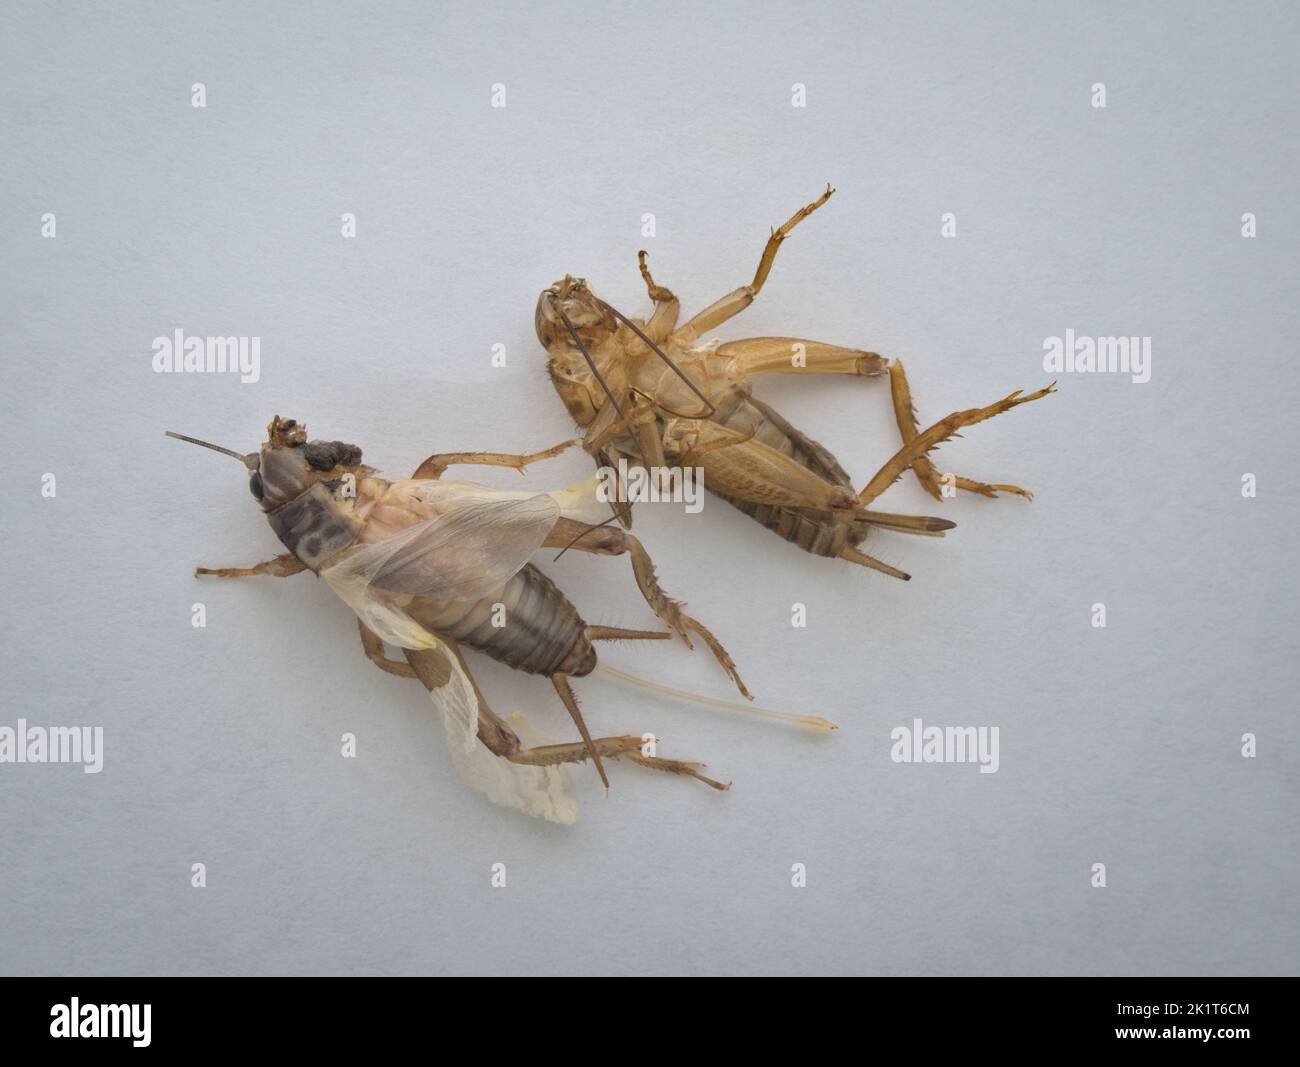 House cricket moulting on the white pedestal from the top view Stock Photo